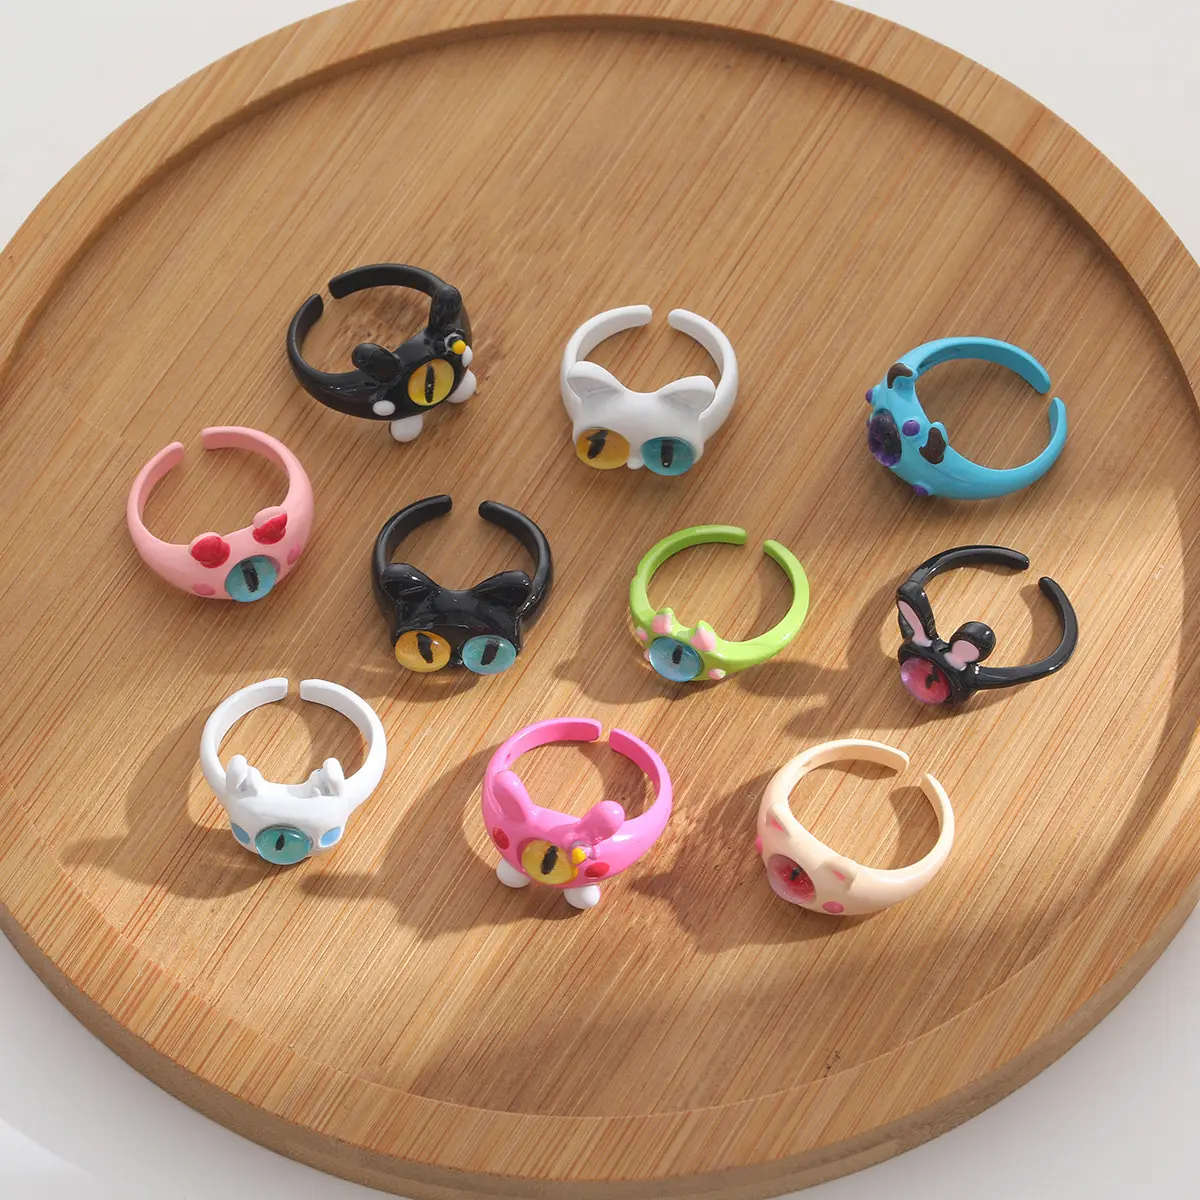 Hot Selling Colorful Little Devil Monster Ceramic Alloy Adjustable Ring Jewelry 3D Animal Jewelry Accessories